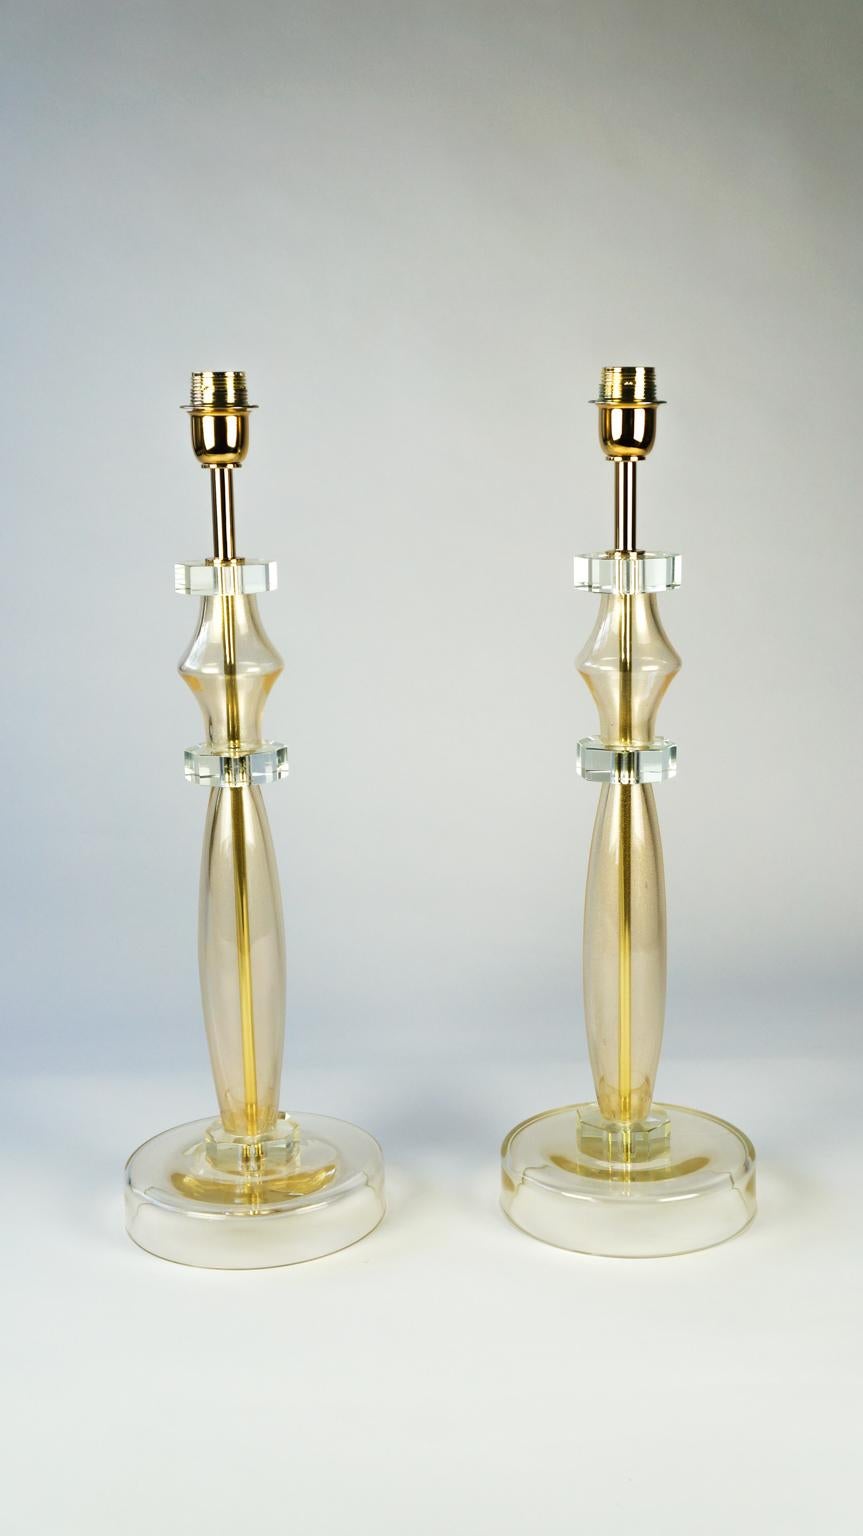 Donà Furnace Mid-Century Modern Gold Leaf Two of Murano Glass Table Lamps, 1978 For Sale 5